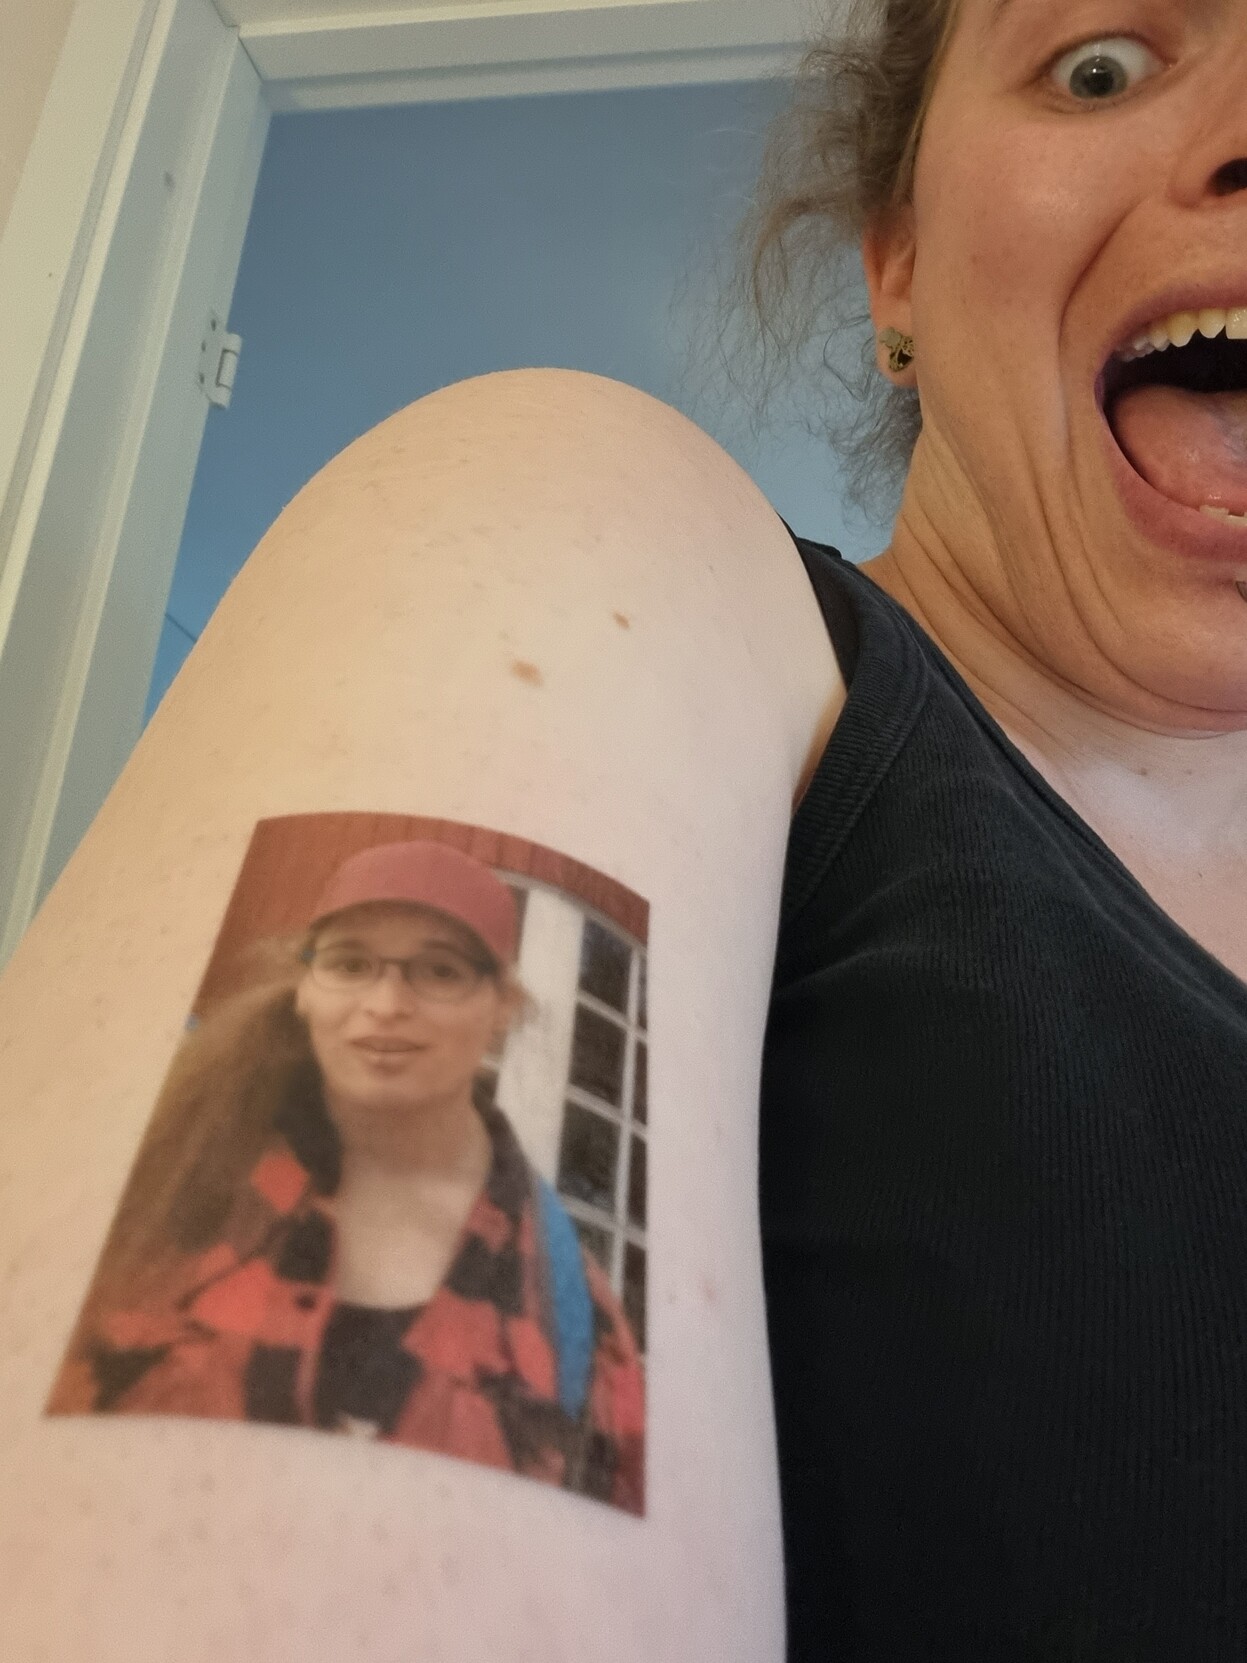 It's a picture of me in temporary tattoo form on my arm. The real me is looking a slight bit panicky.